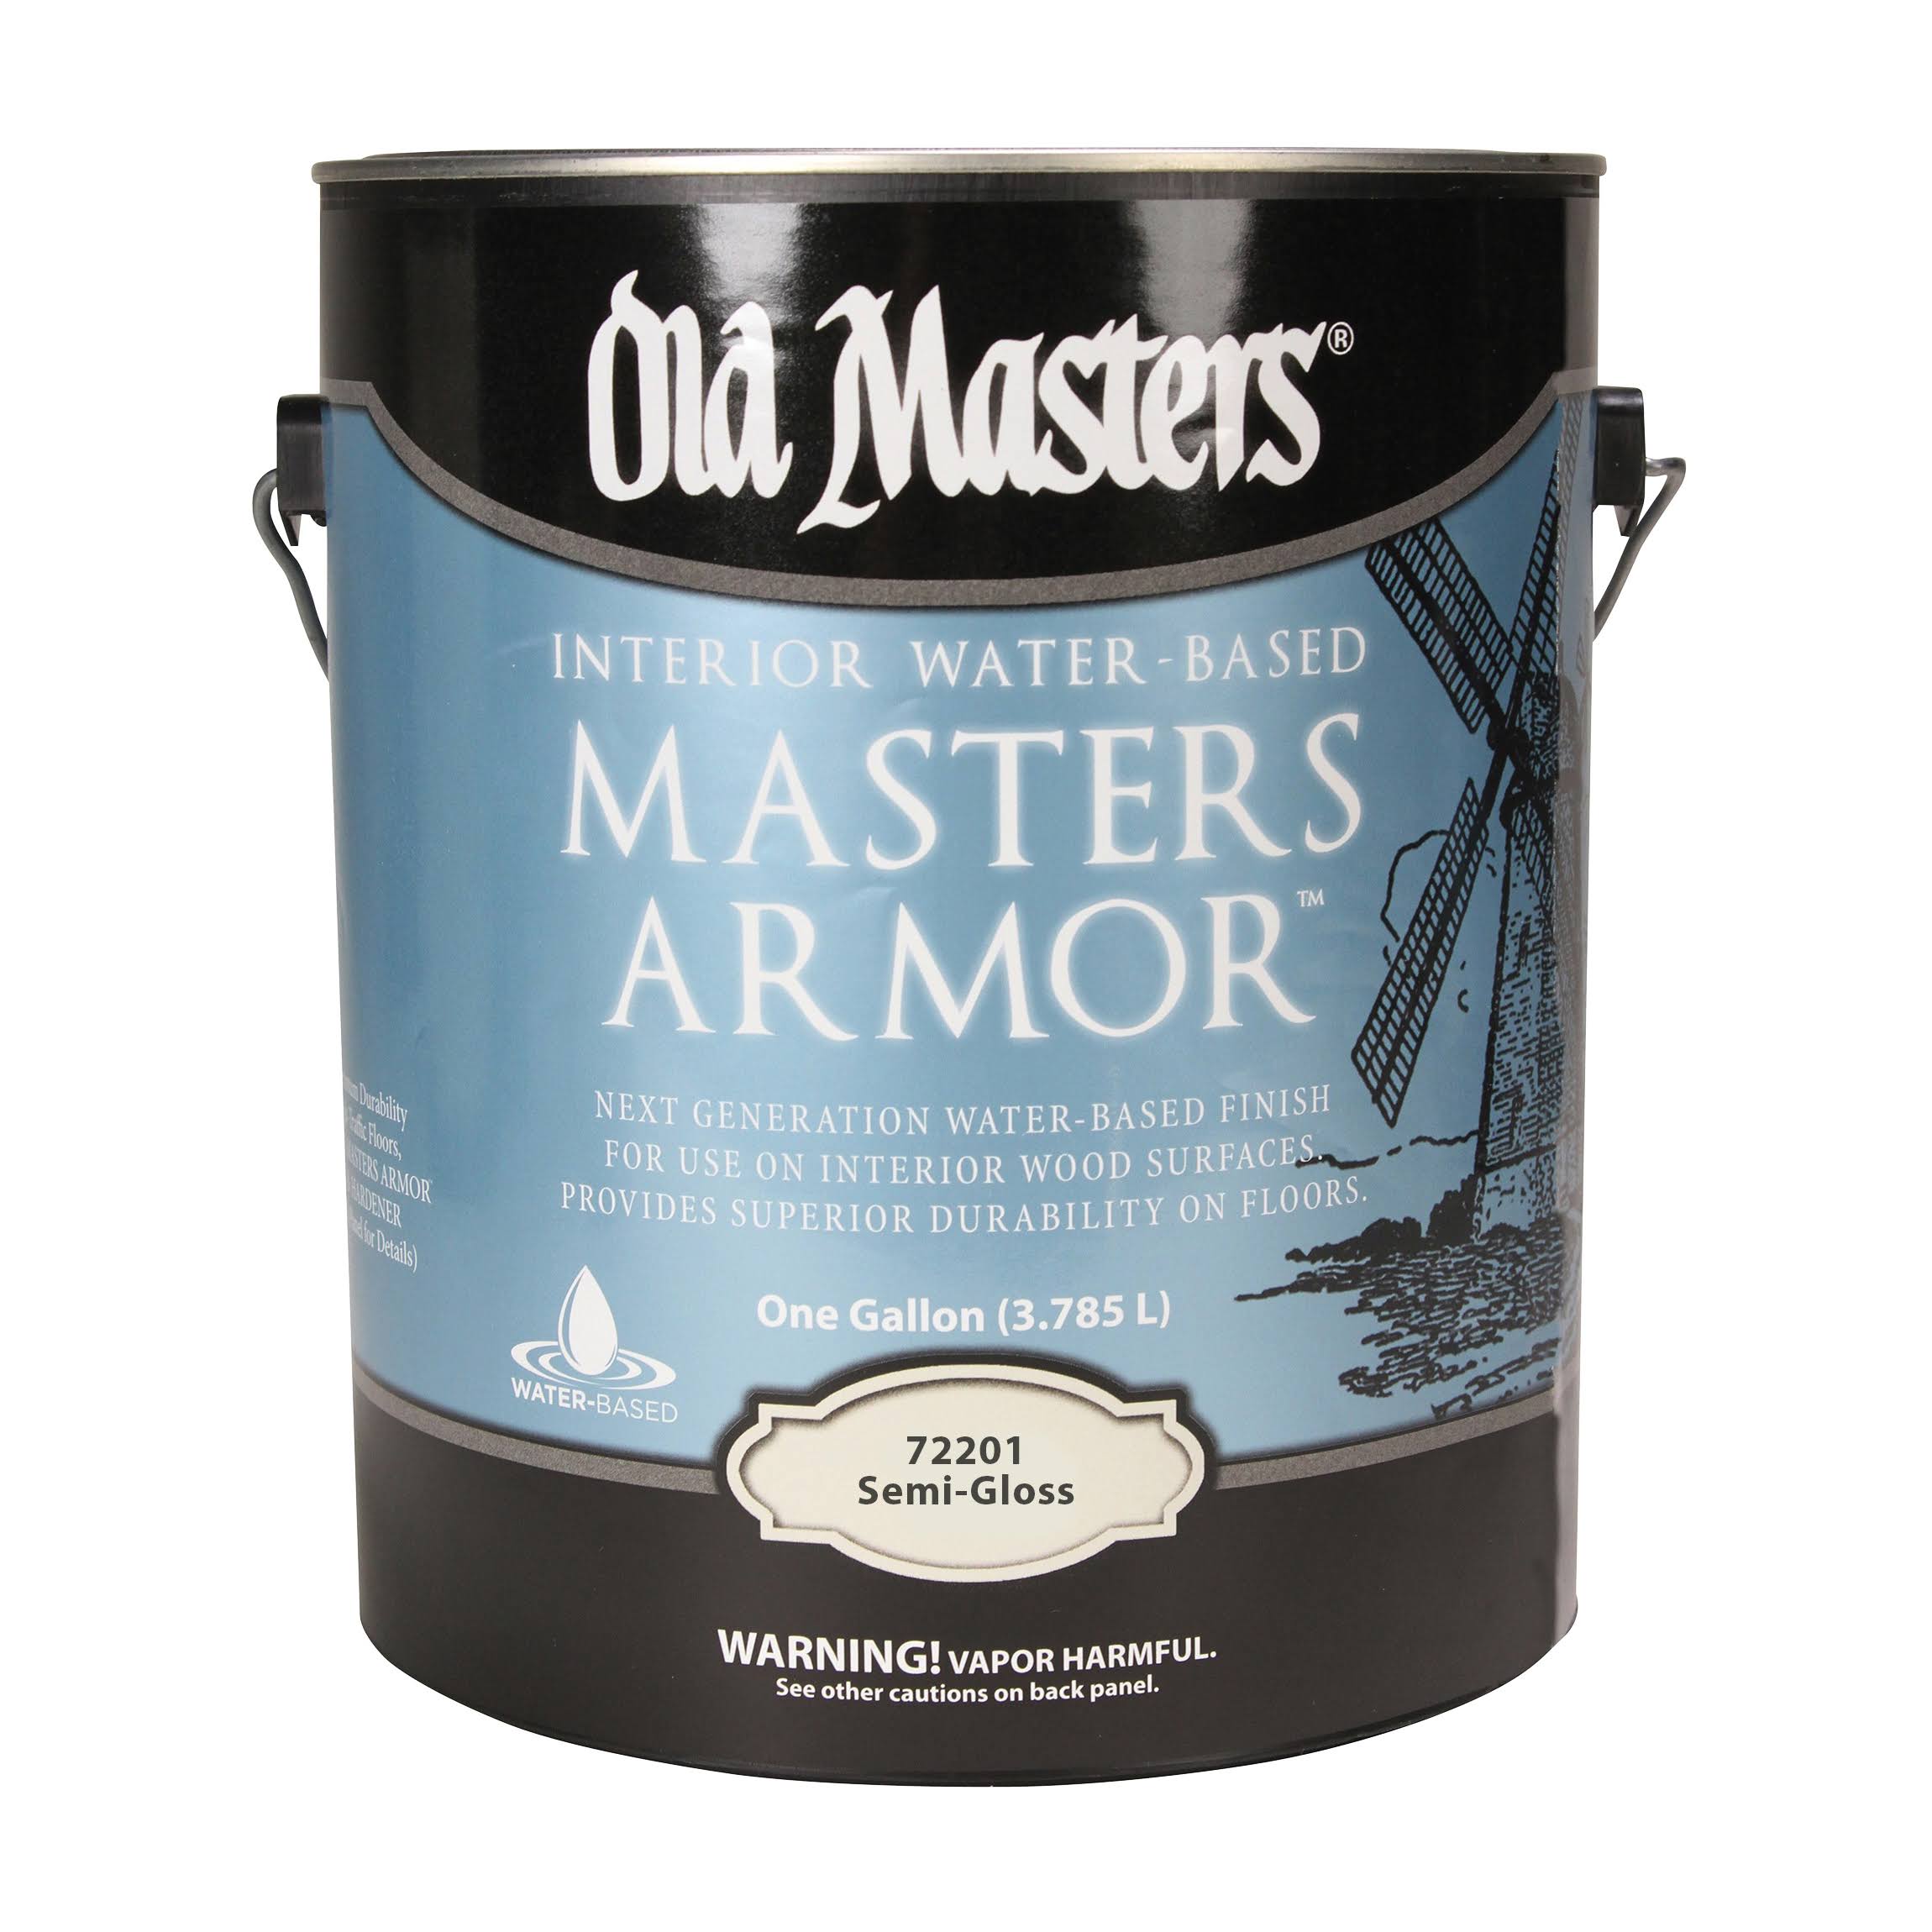 Old Masters 72201 Wood Stain, Semi-Gloss, 1 gal